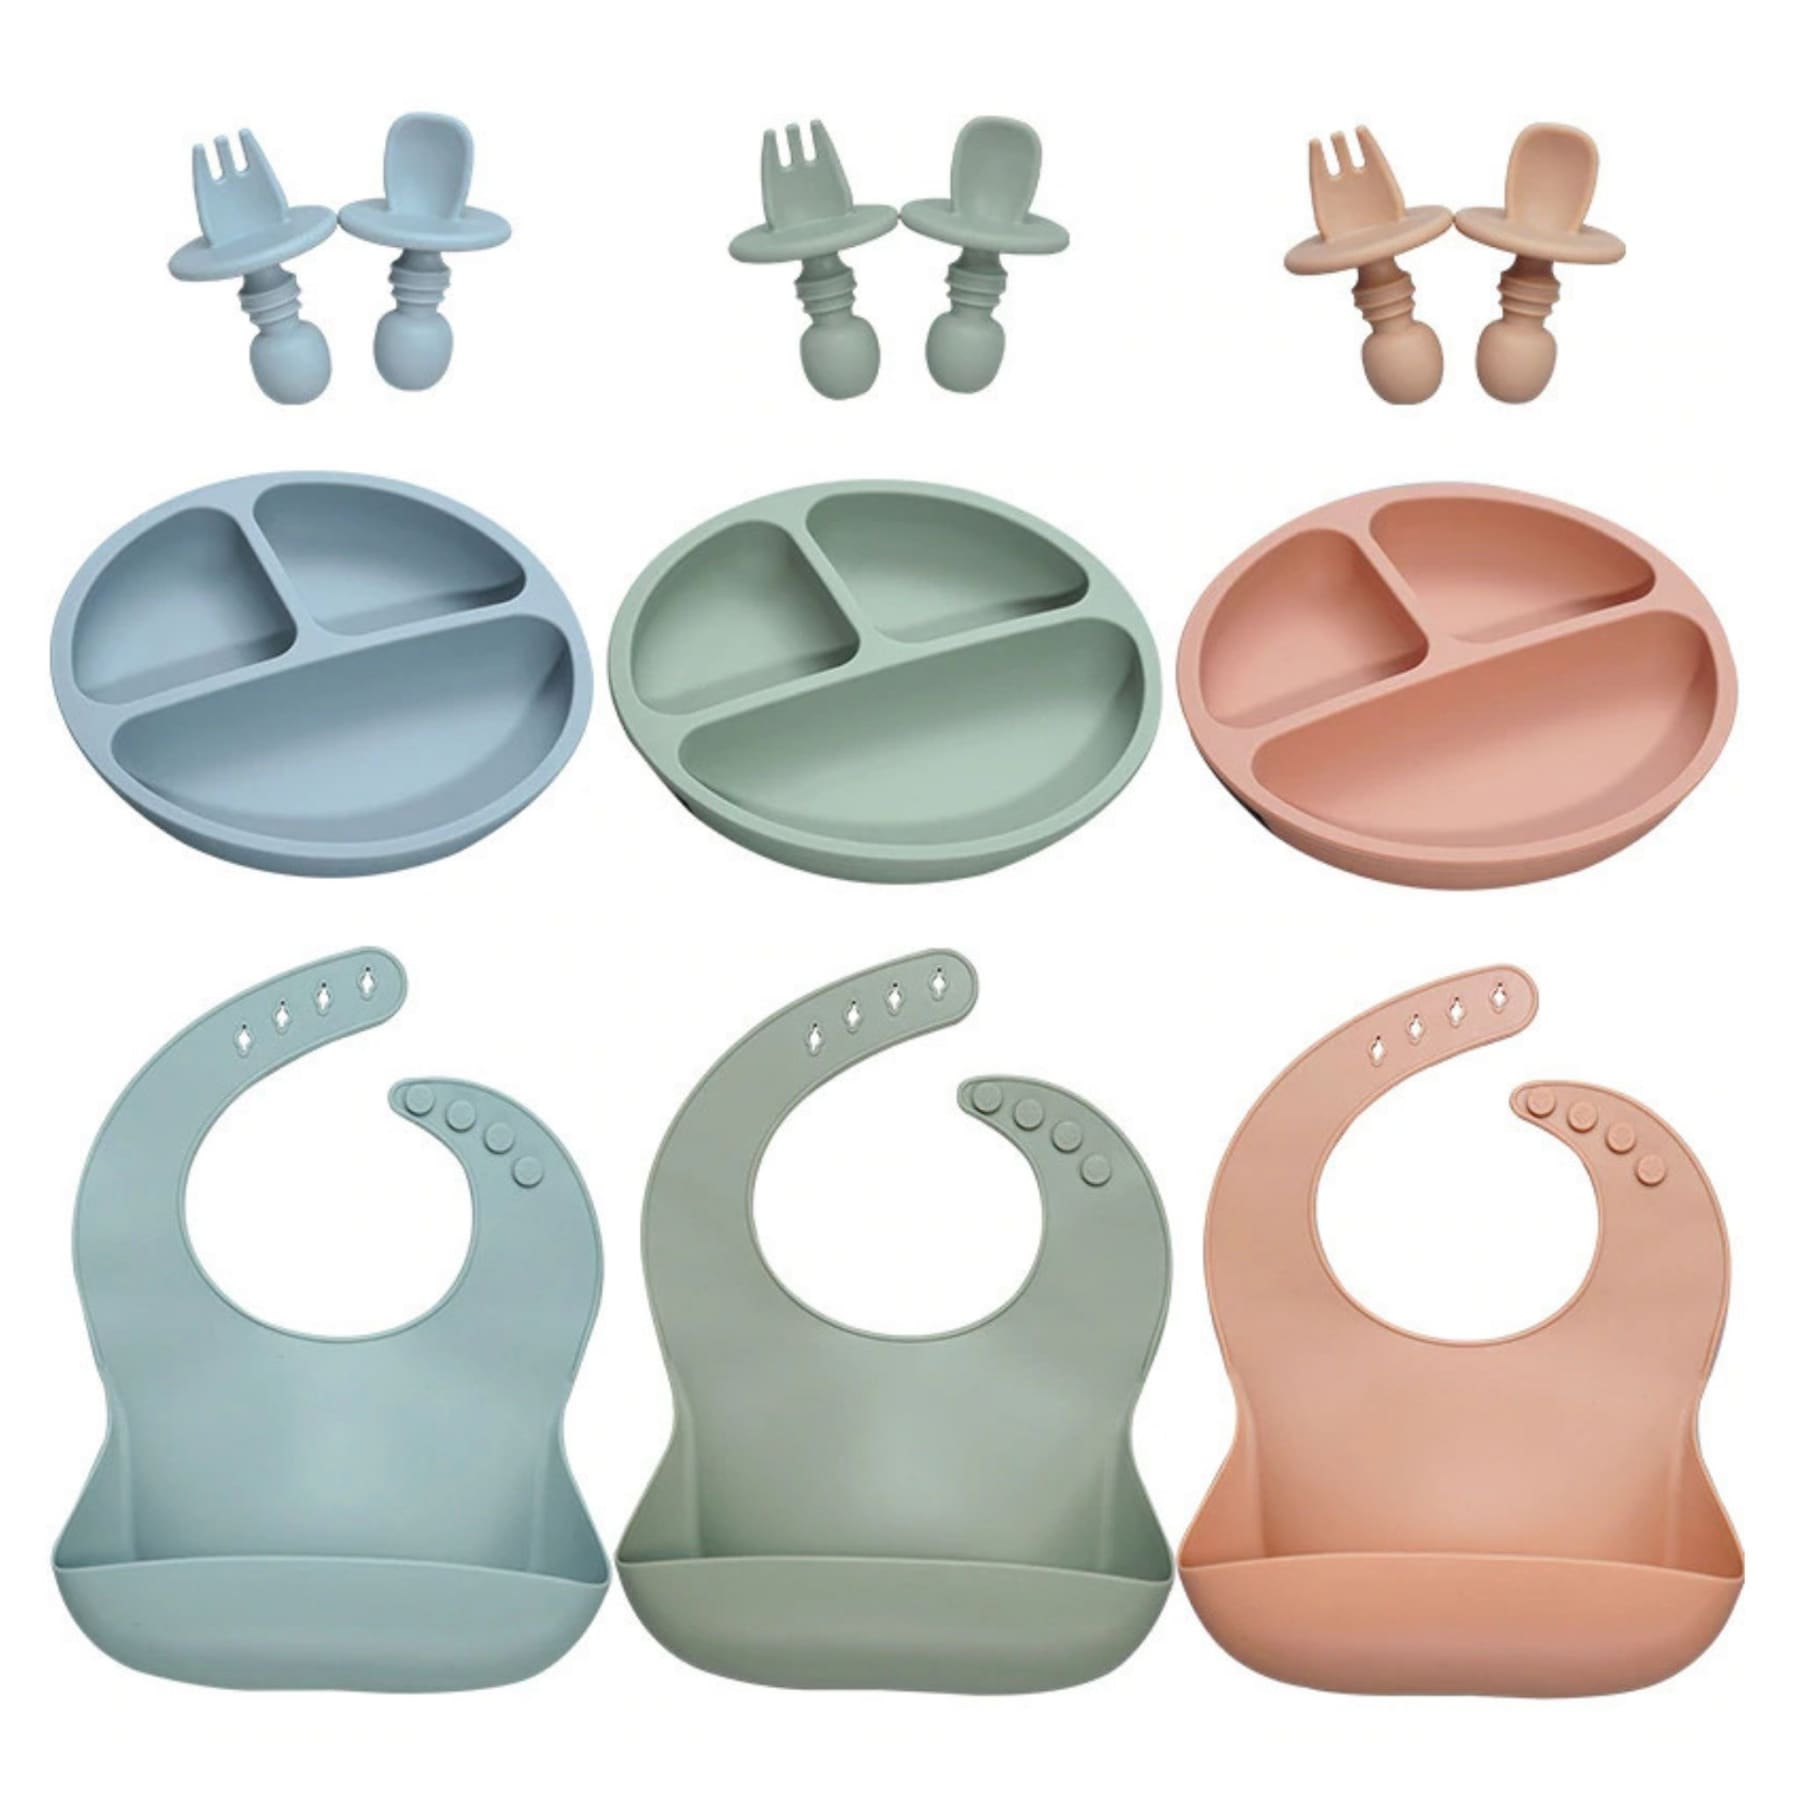 Silicone Baby Table Dining Set - Bib Plate and Utensils - 